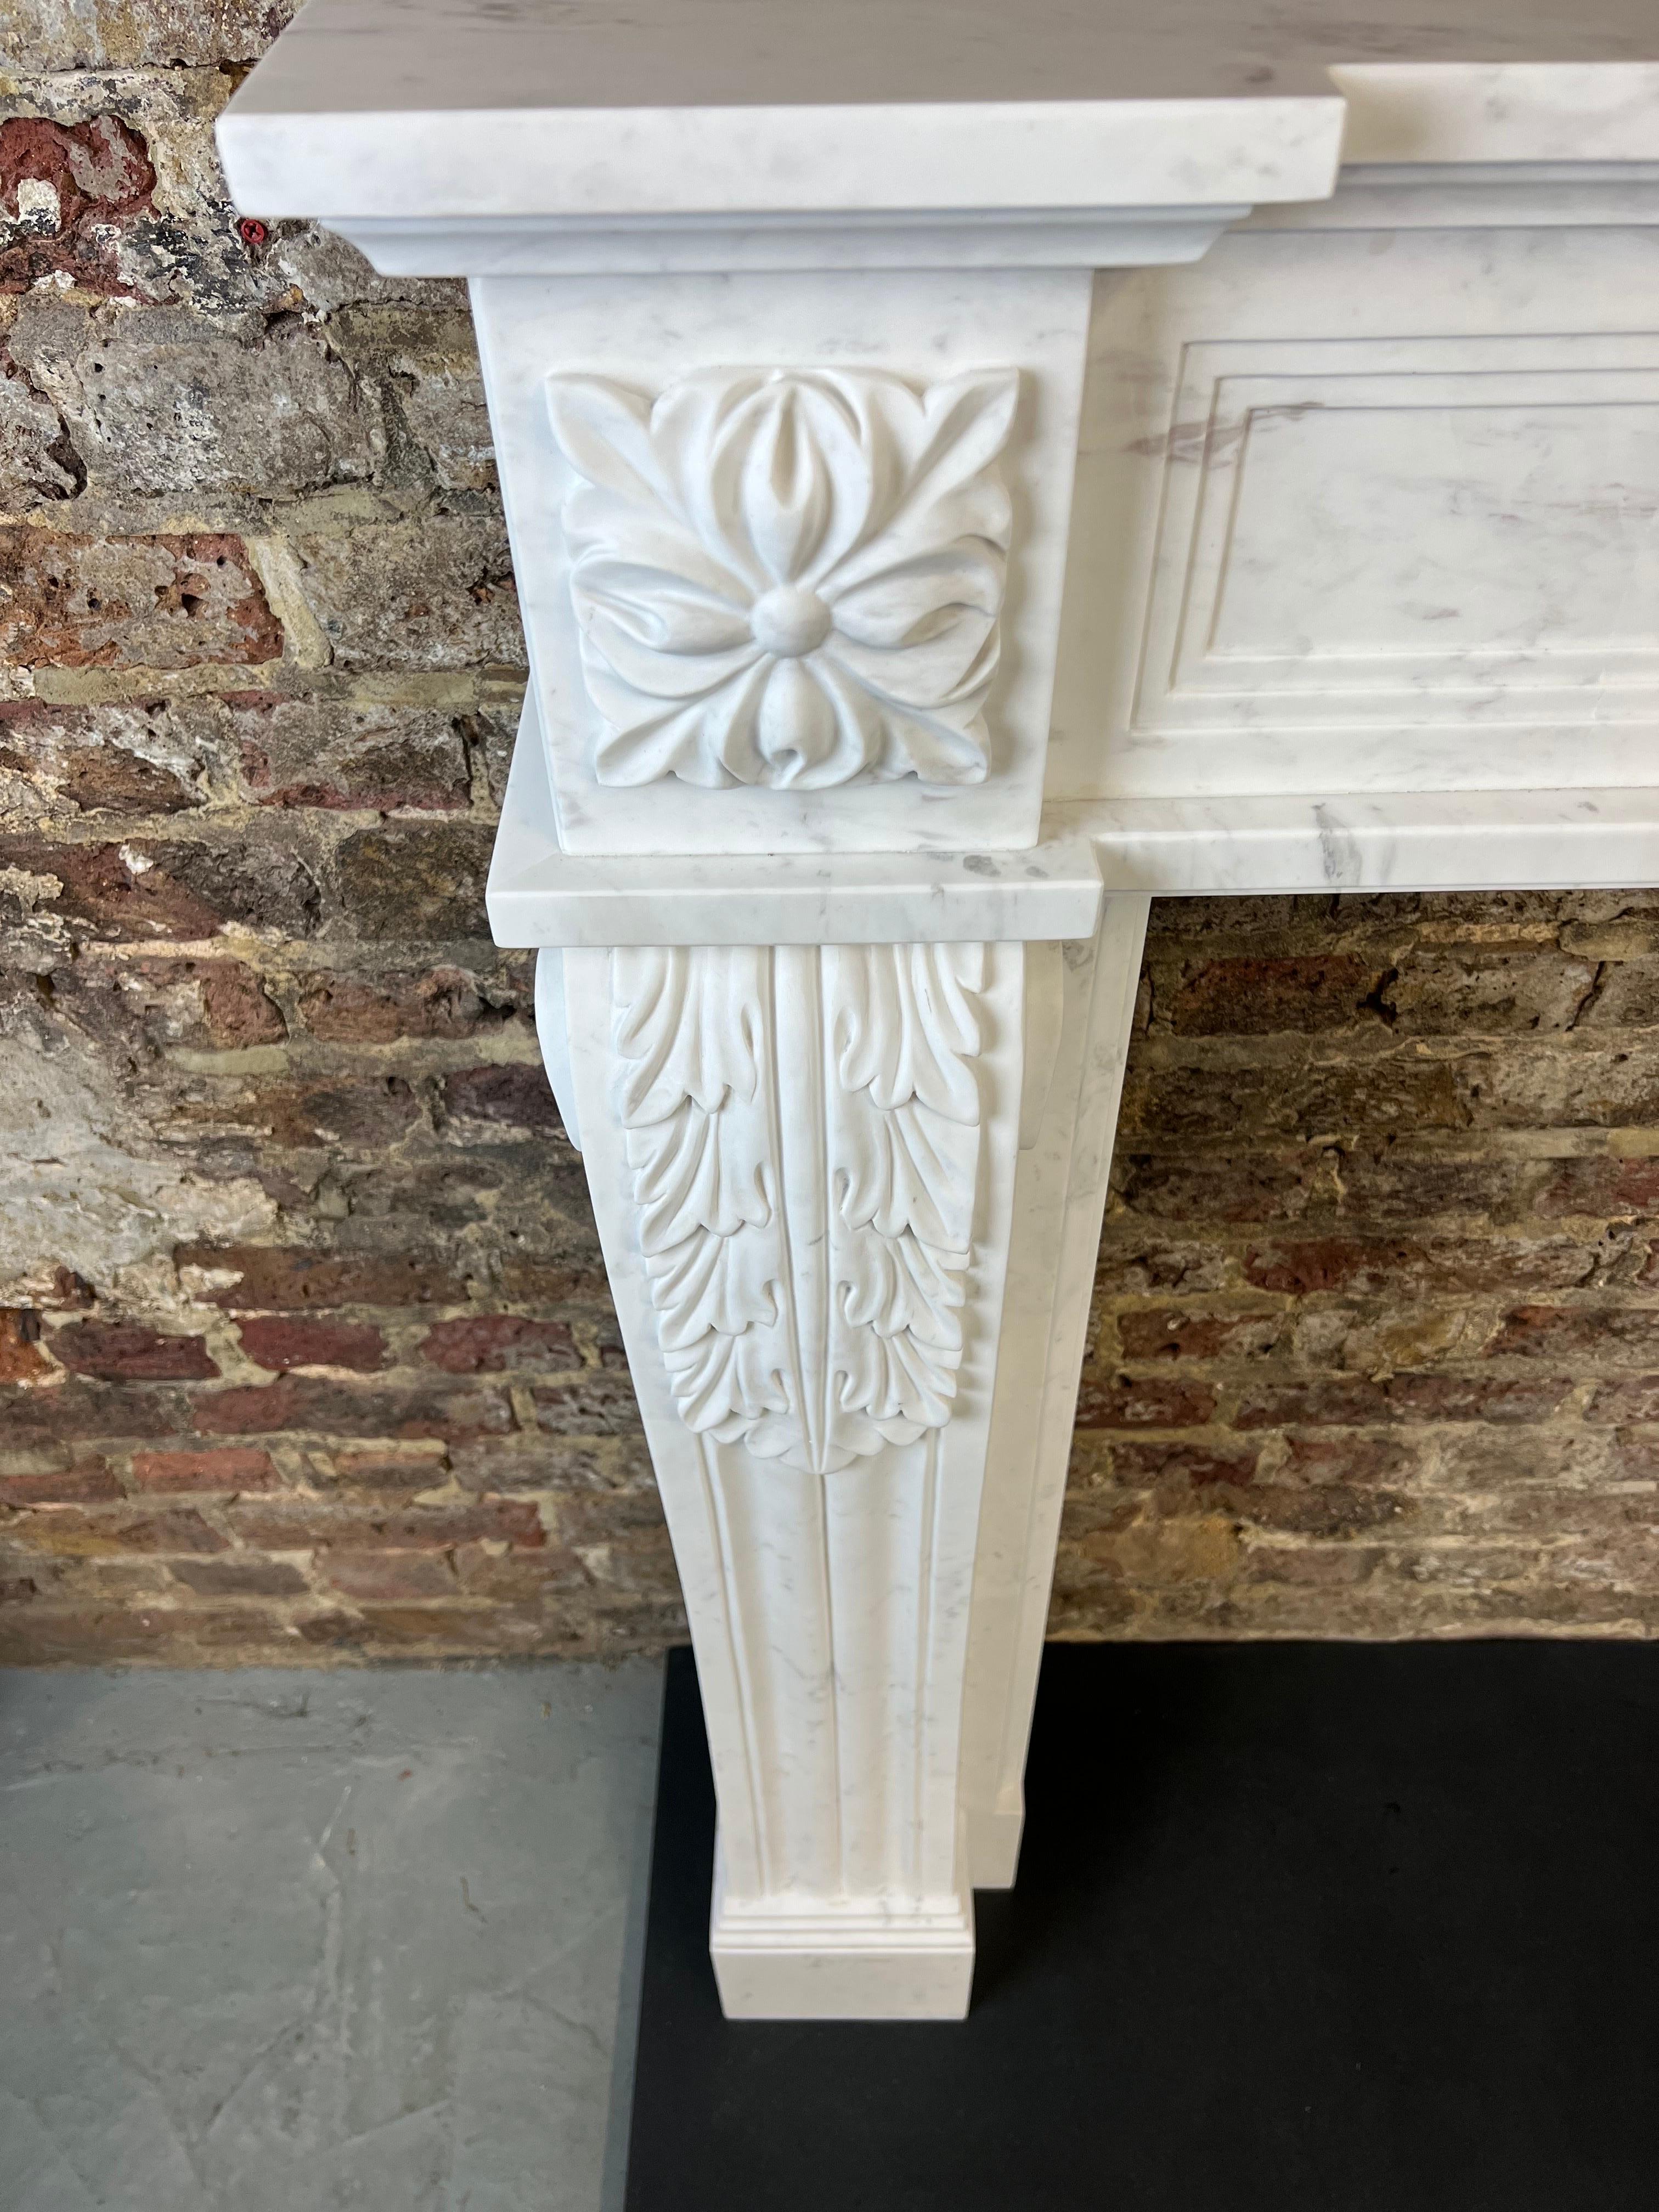 20th Century Louis XVI style antique marble fireplace mantlepiece.
Hand Carved in quality Italian Statuary (white) marble with a honed surface finish. Carved with decorative foliage on each jamb, centre tableau and capital, together with a recessed